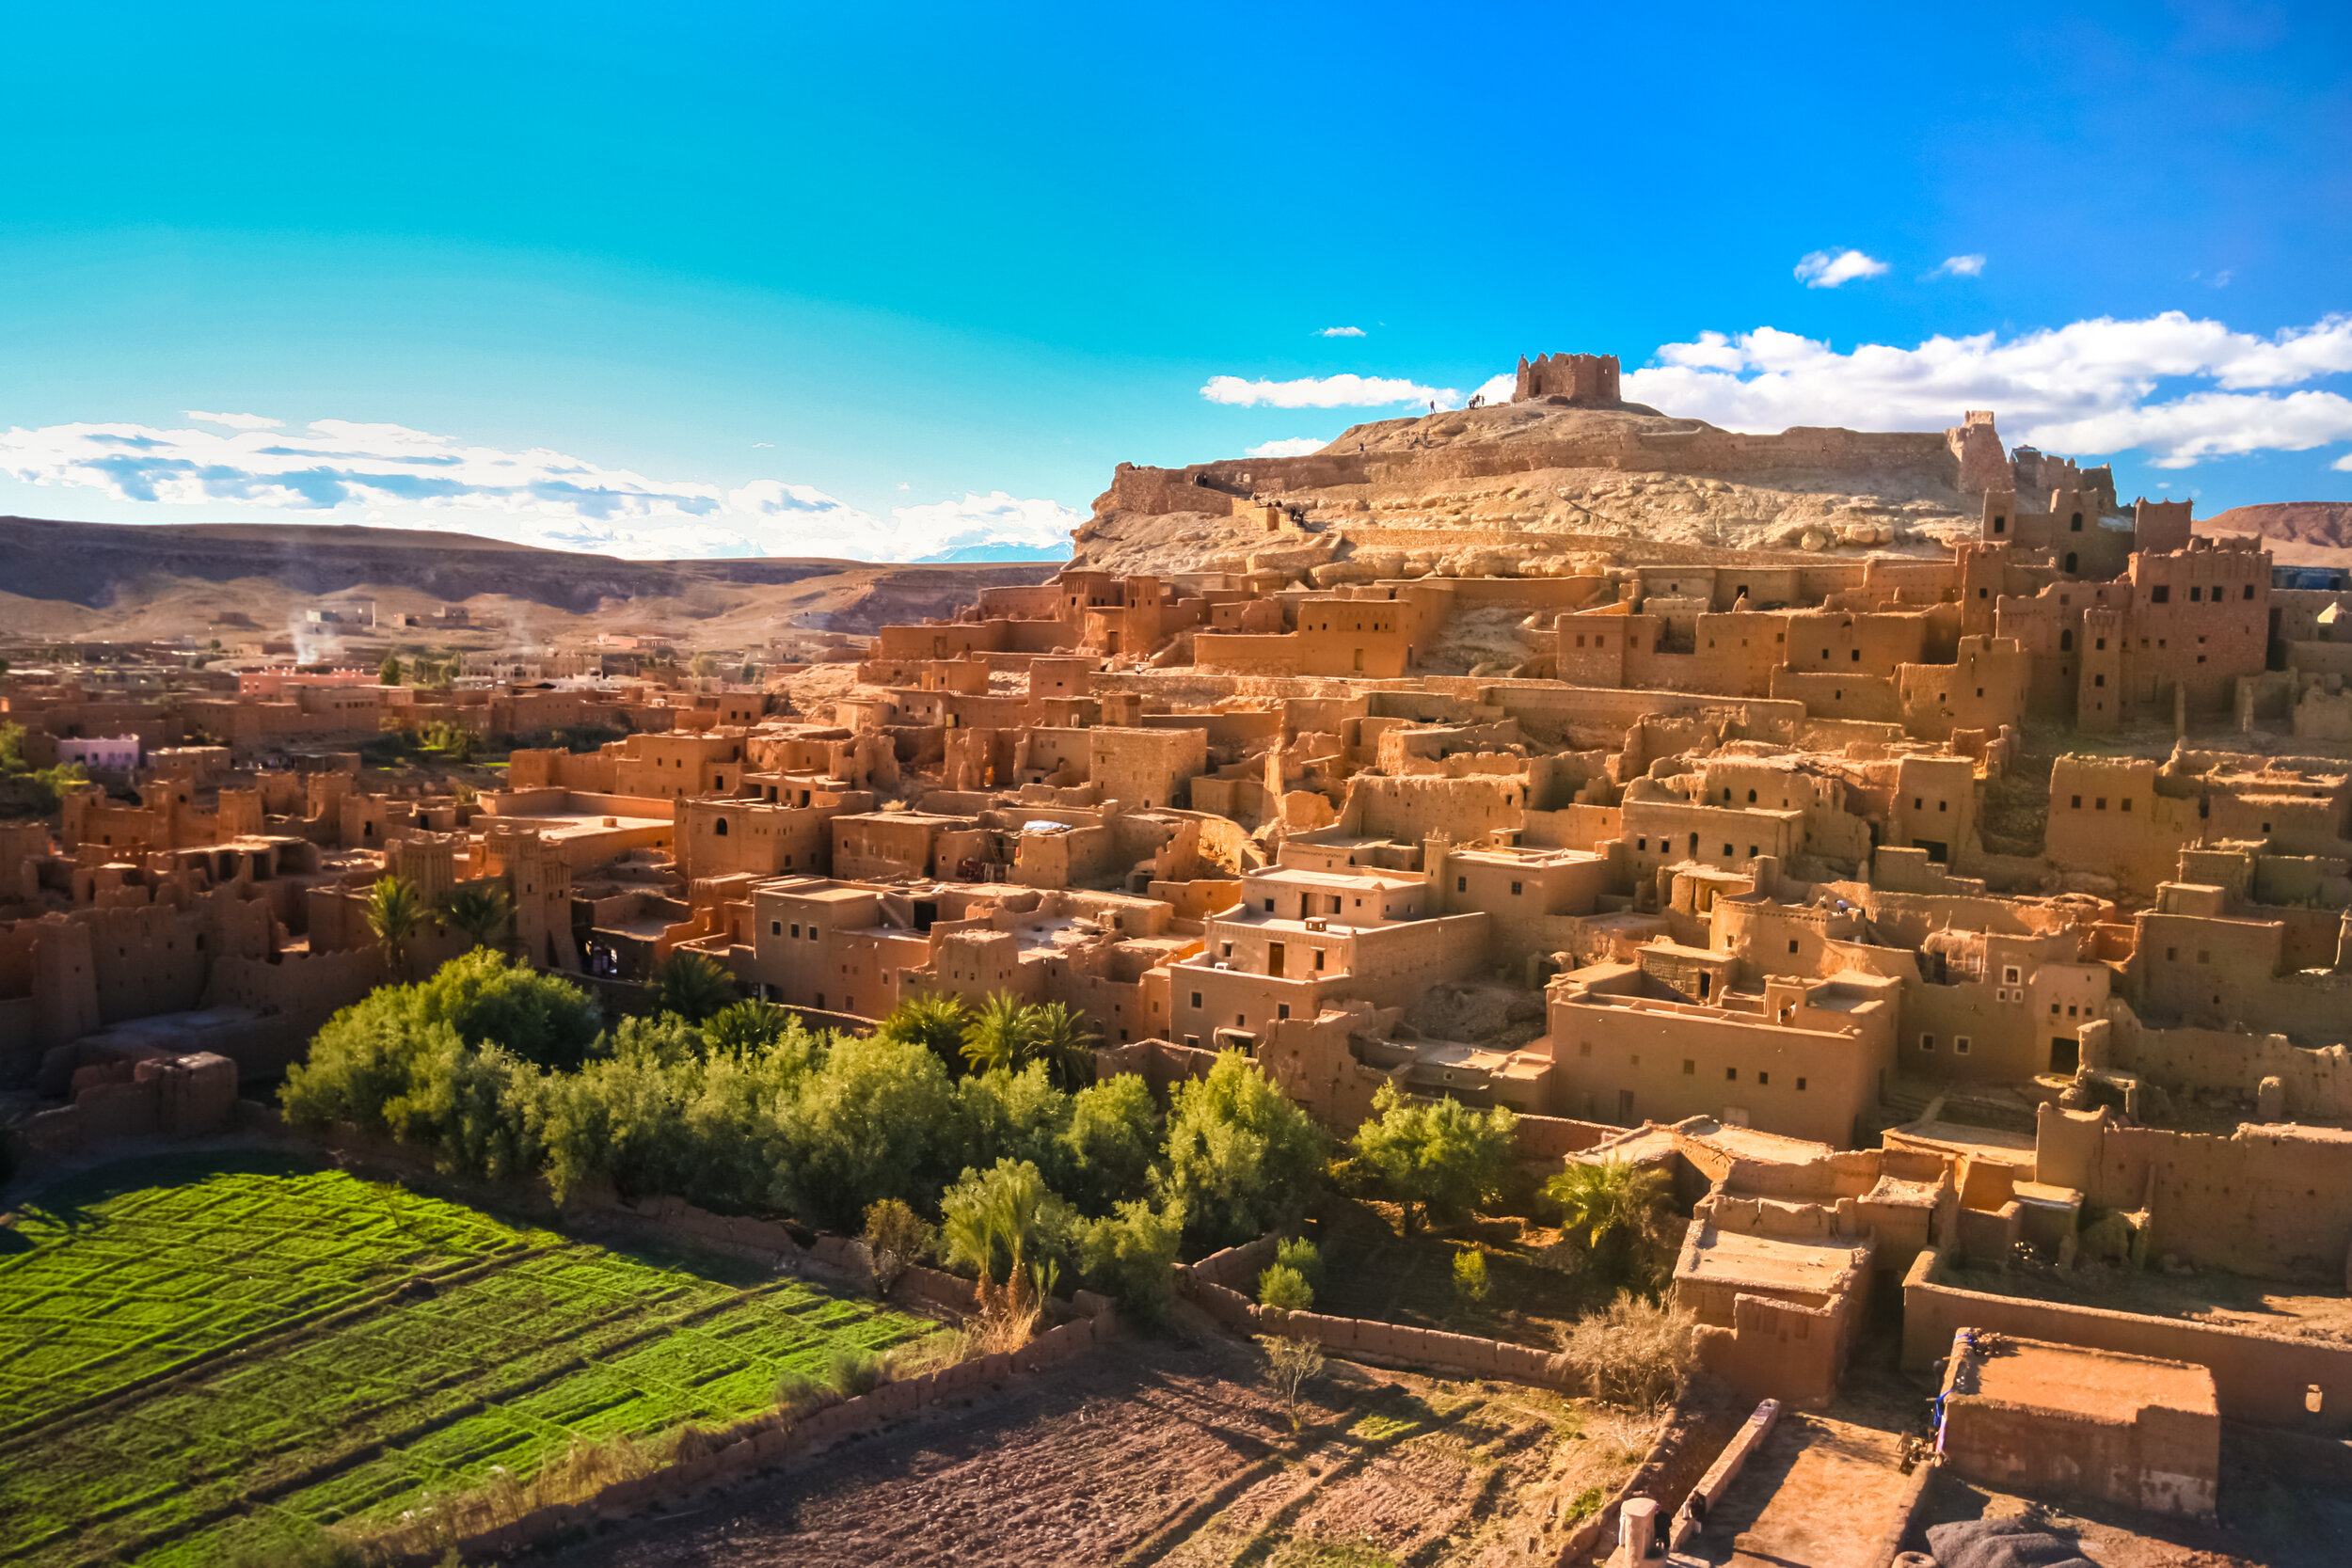  Ait Benhaddou, a fortified city along the former caravan route between the Sahara and Marrakech 